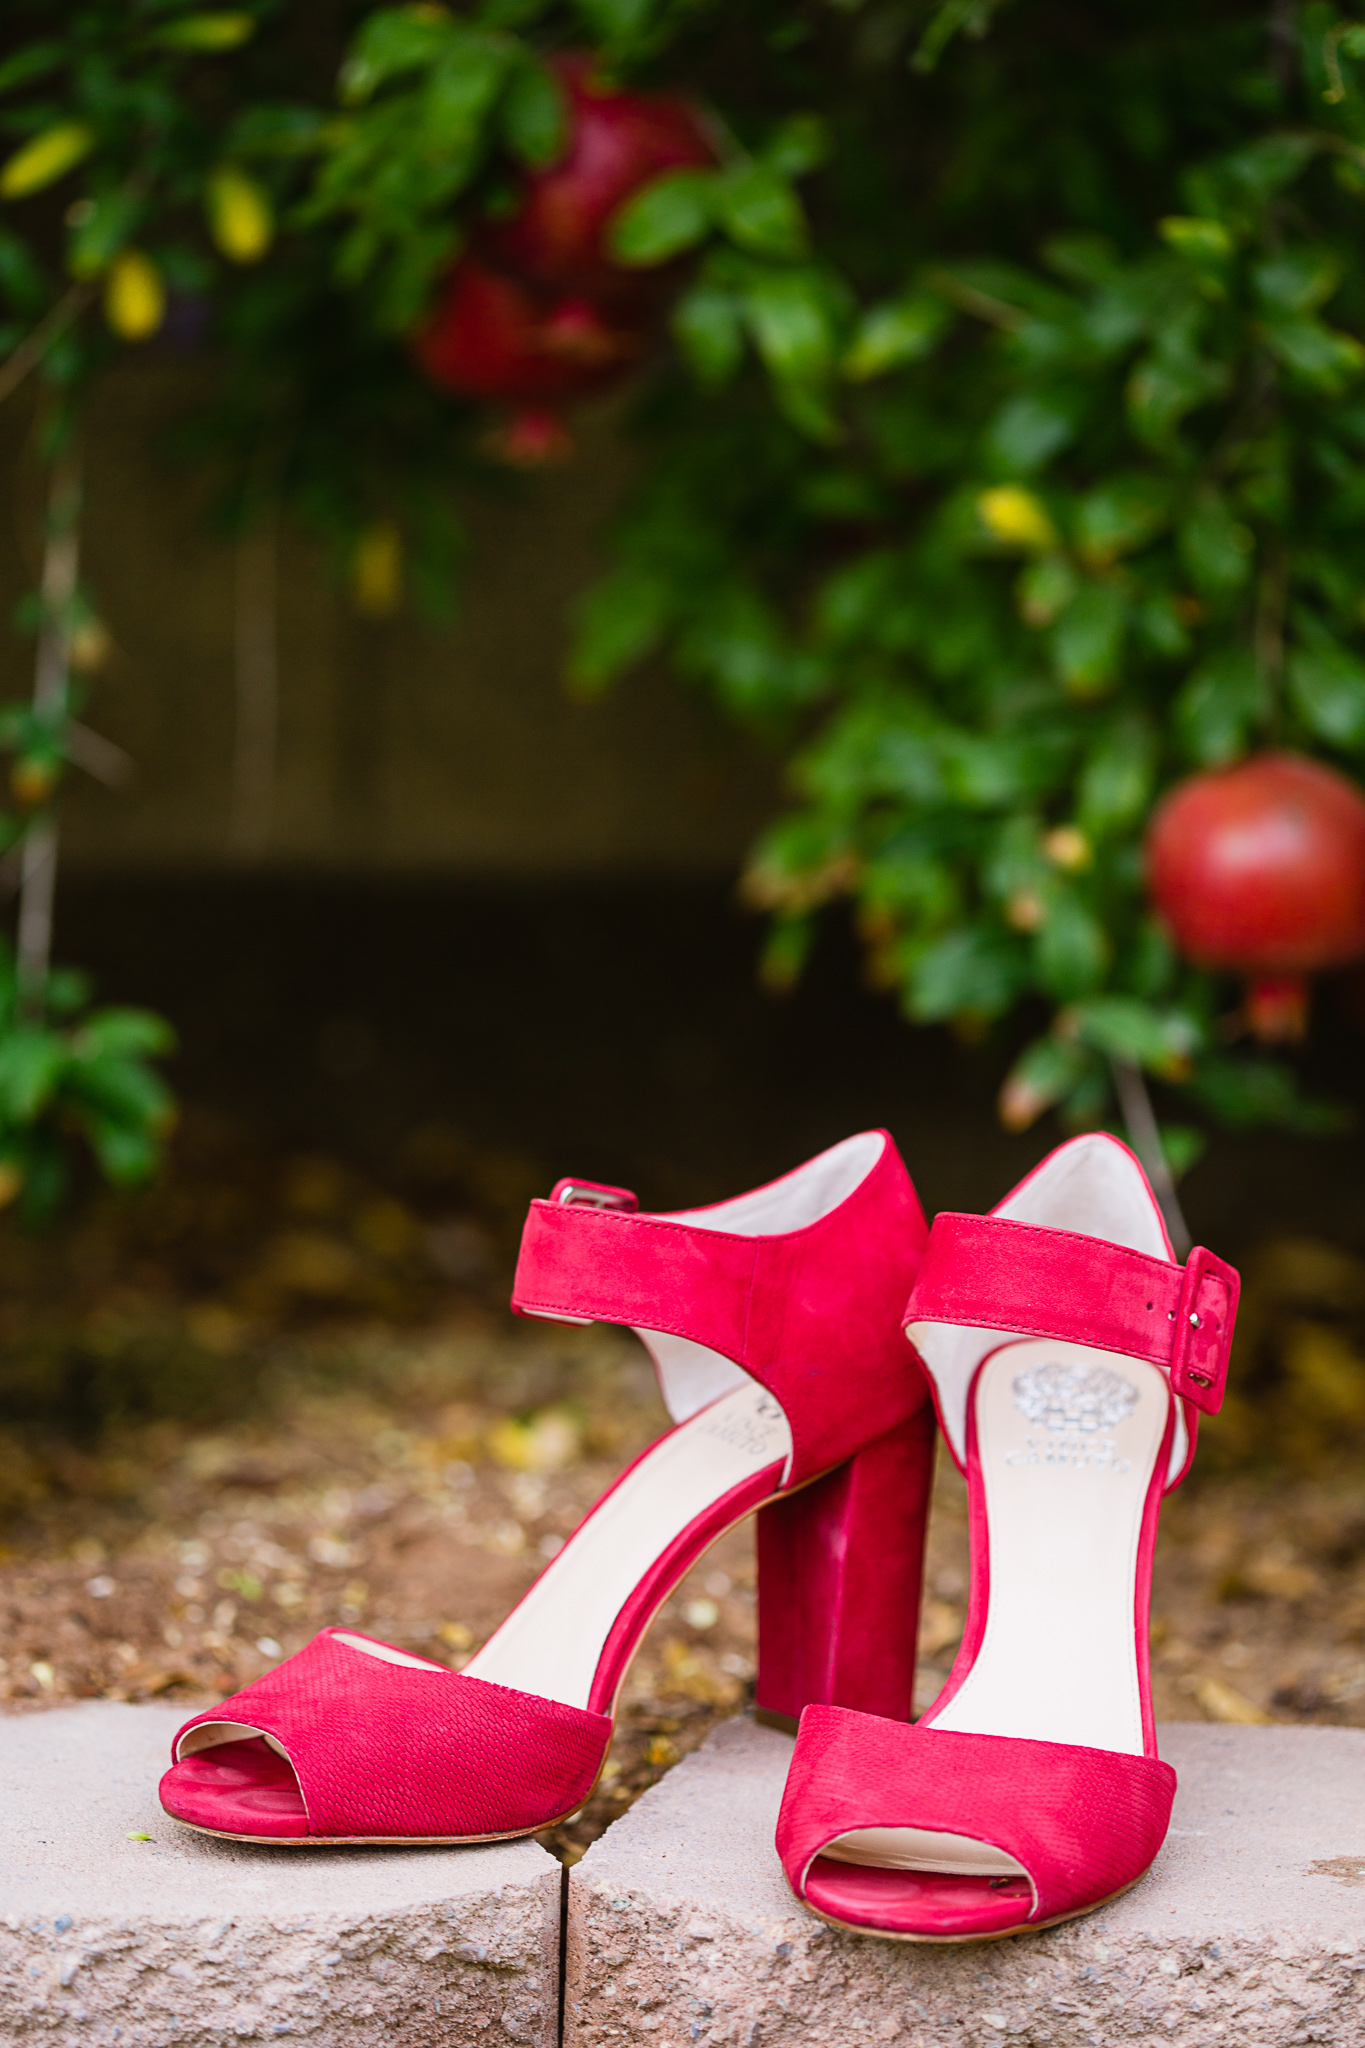 Detail image of bride's red wedding shoes in front of a pomegranate garden by Phoenix wedding photographer PMA Photography.